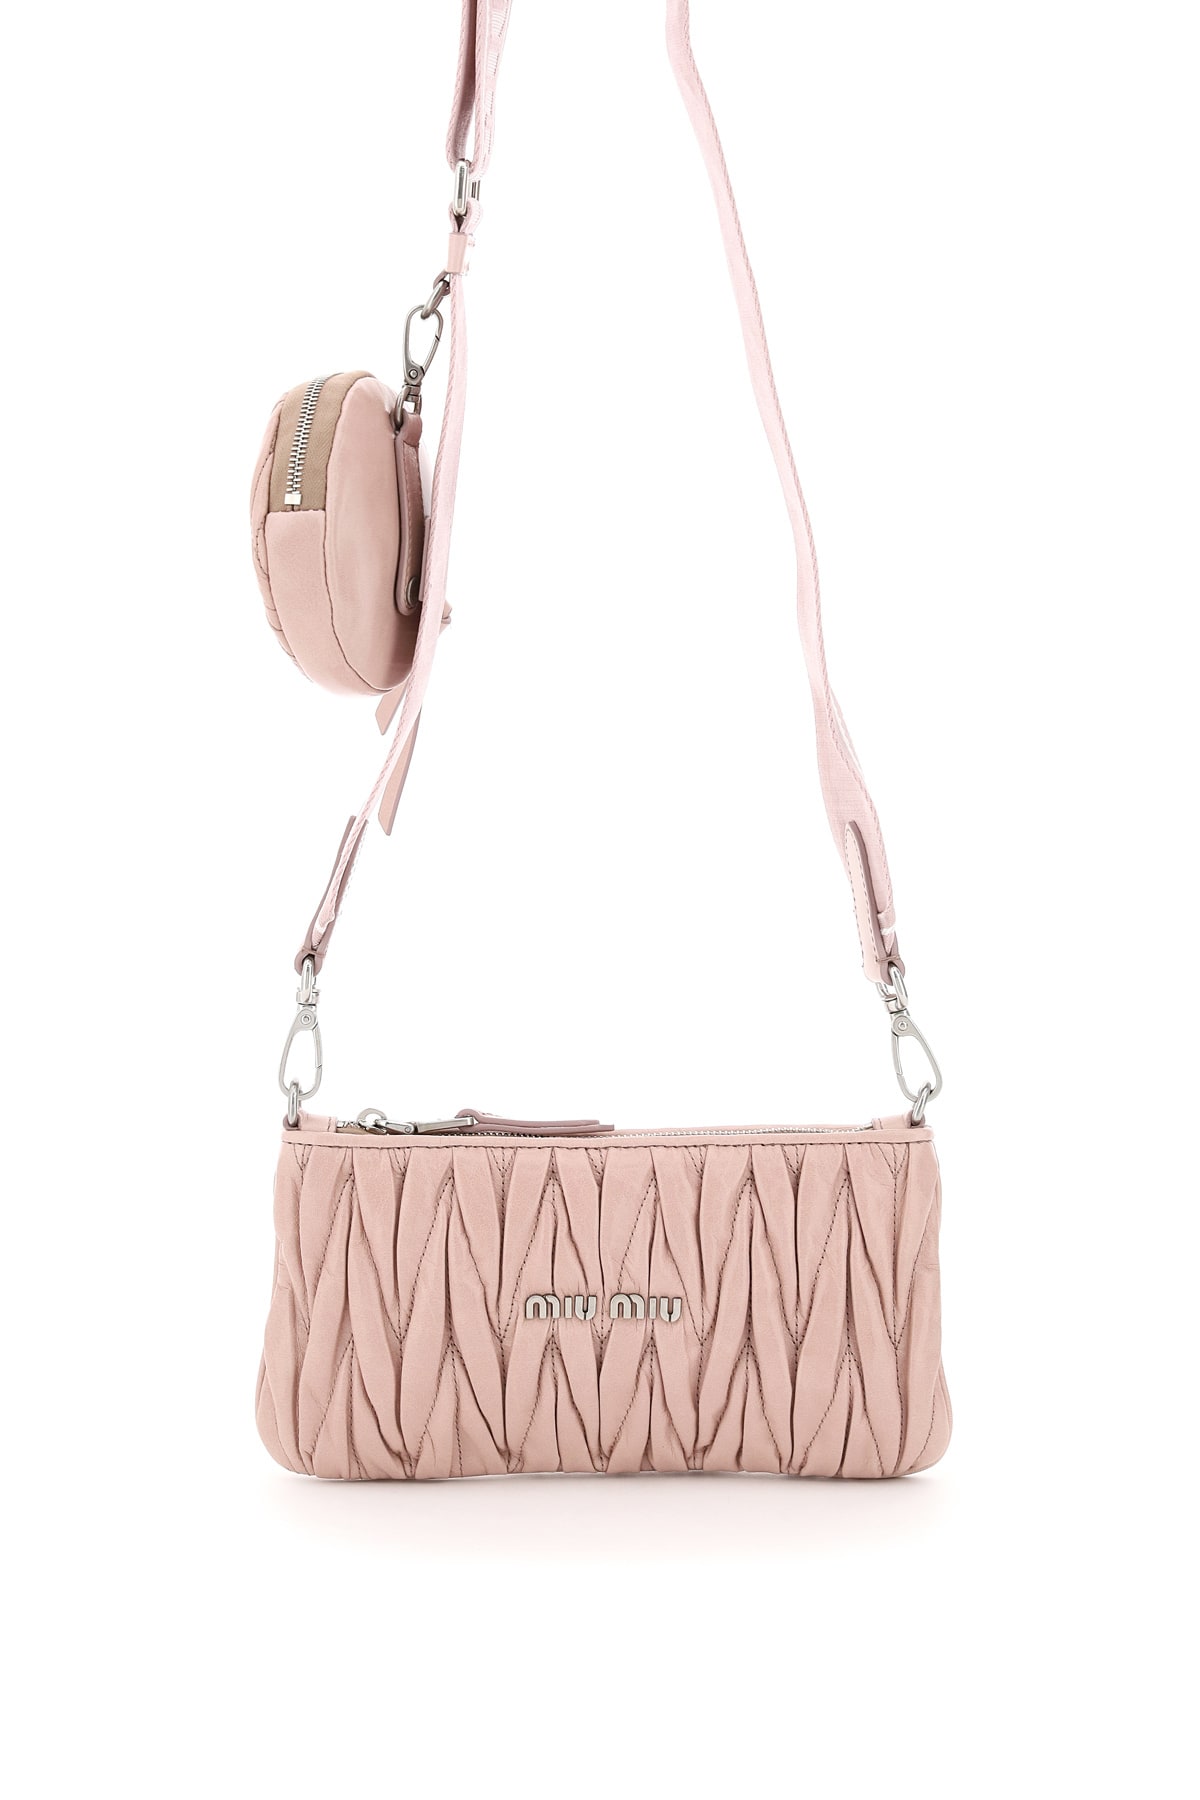 MIU MIU QUILTED MINI BAG WITH POUCH,11902521